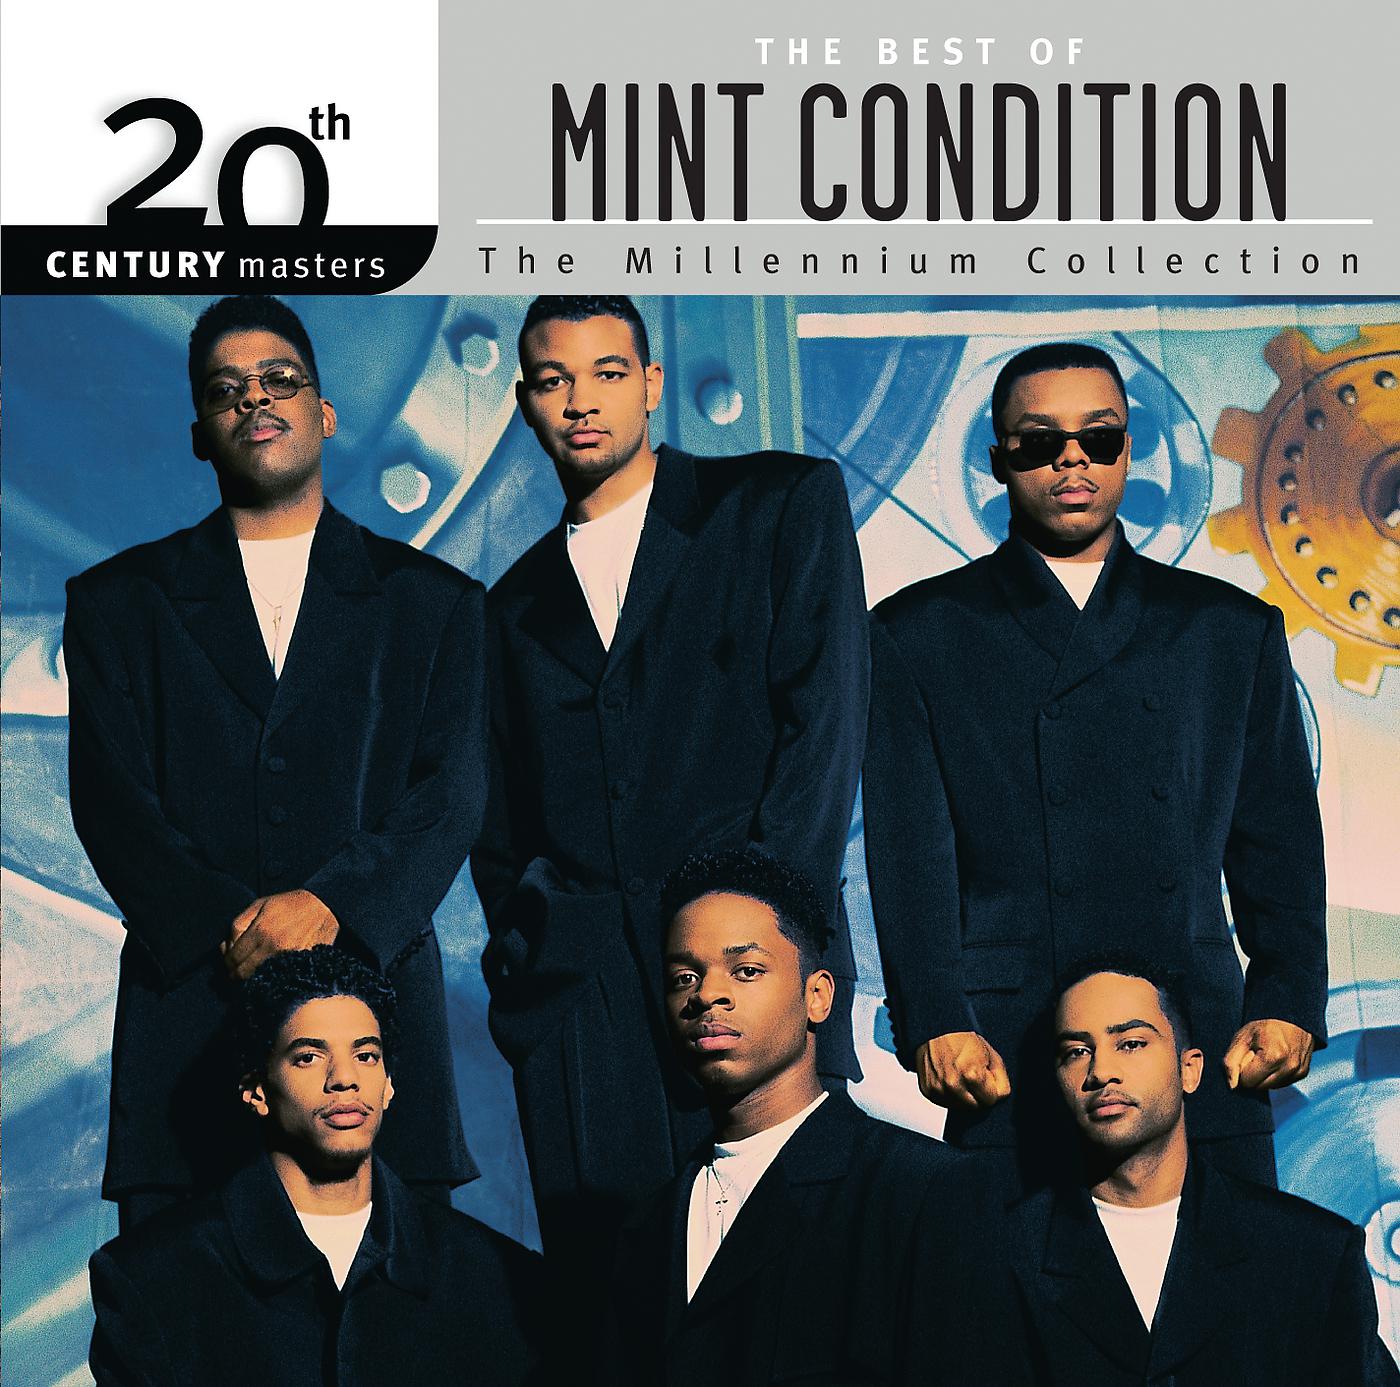 Постер альбома The Best Of Mint Condition 20th Century Masters The Millennium Collection